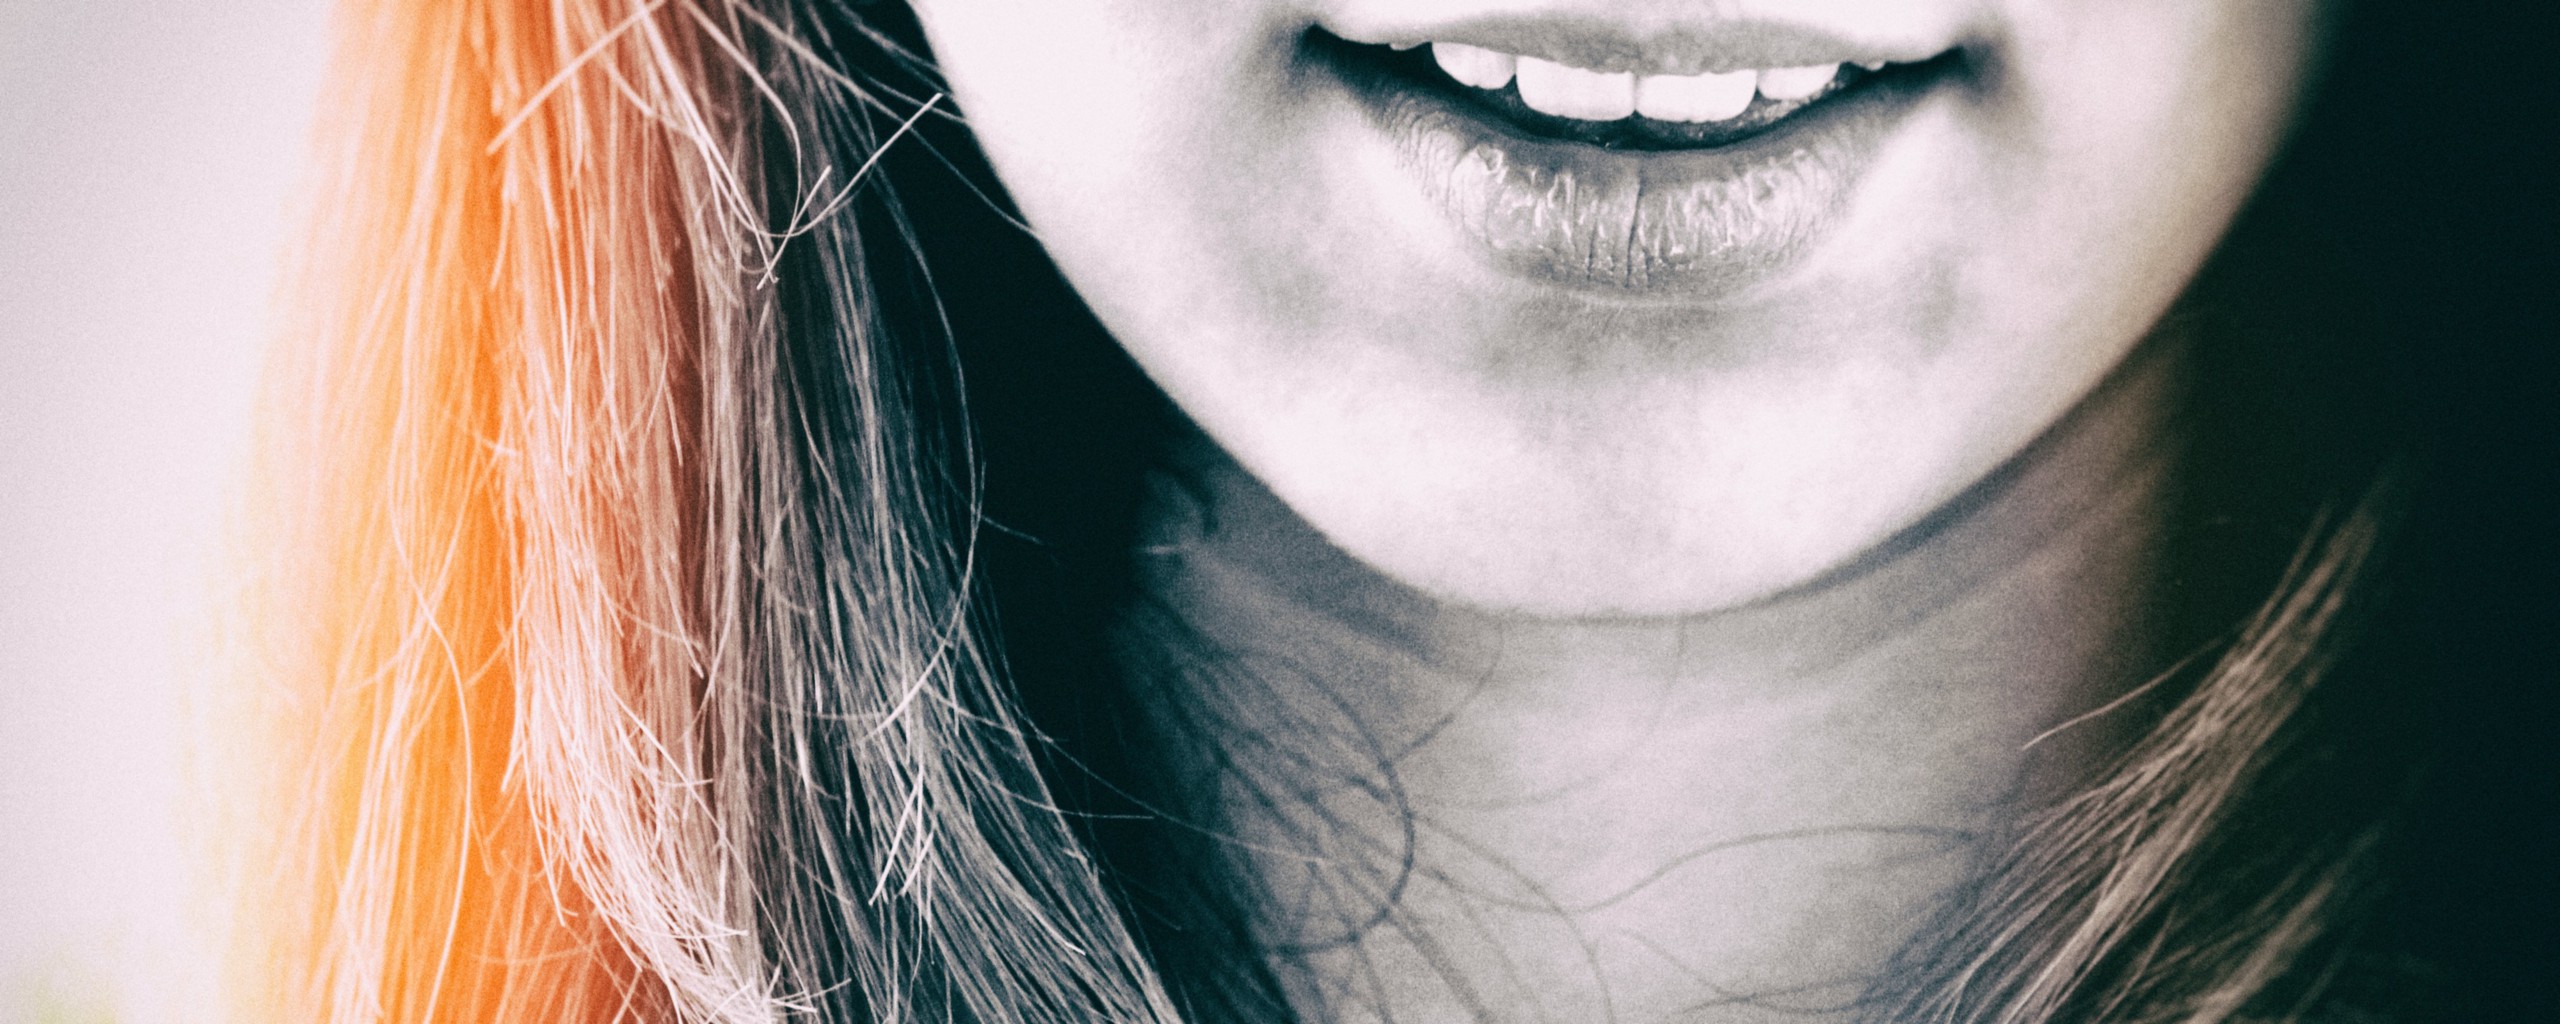 A woman's mouth, smiling.